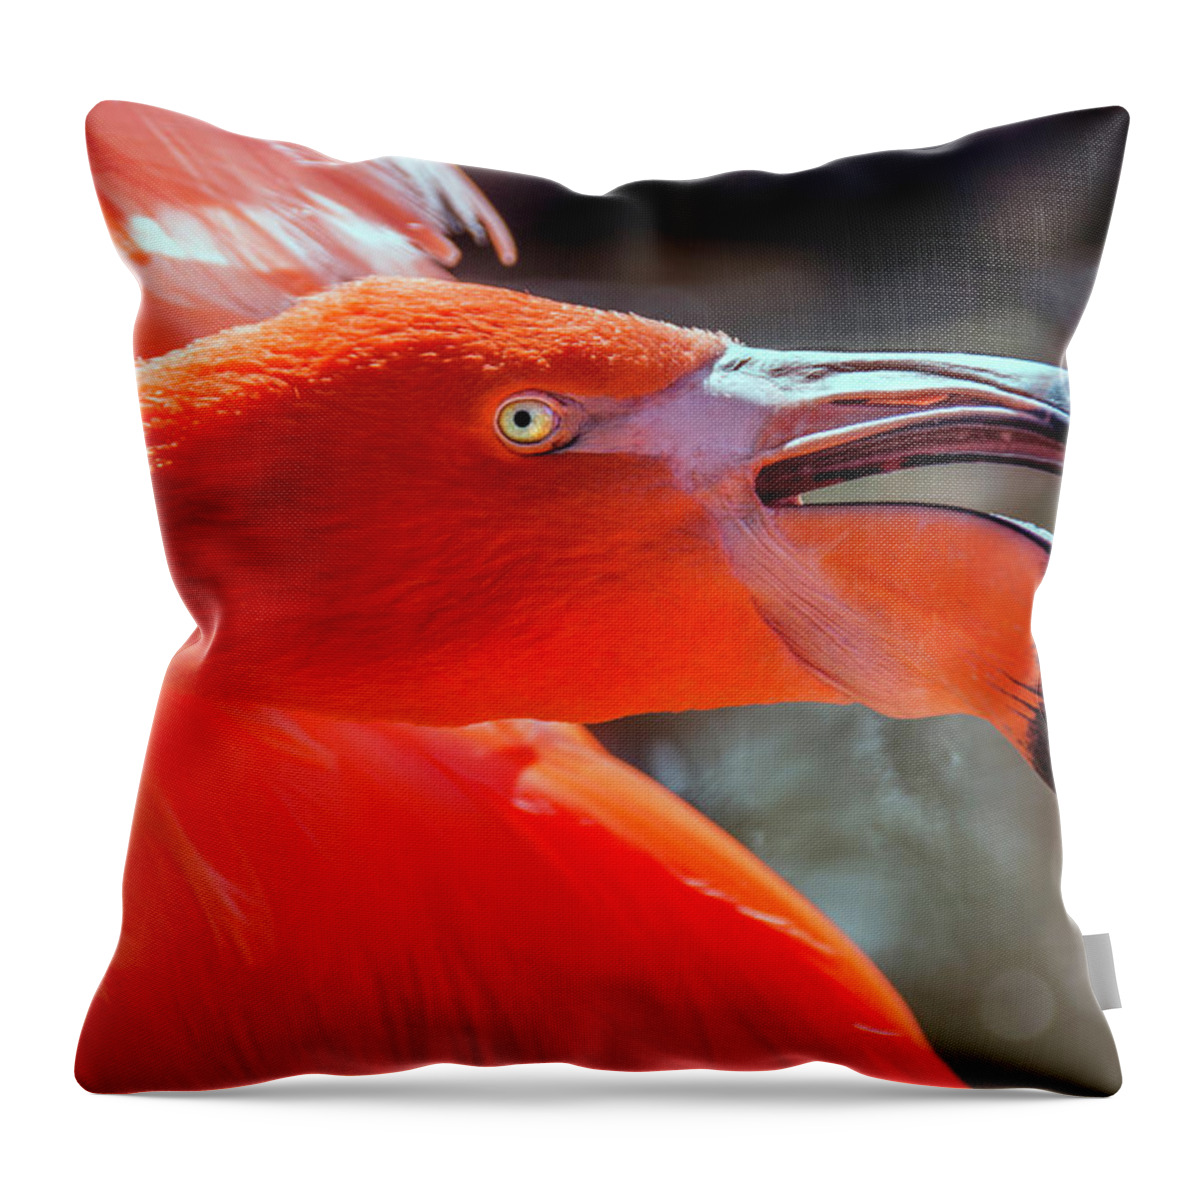 Flamingo Throw Pillow featuring the photograph Pink Flamingo by WAZgriffin Digital